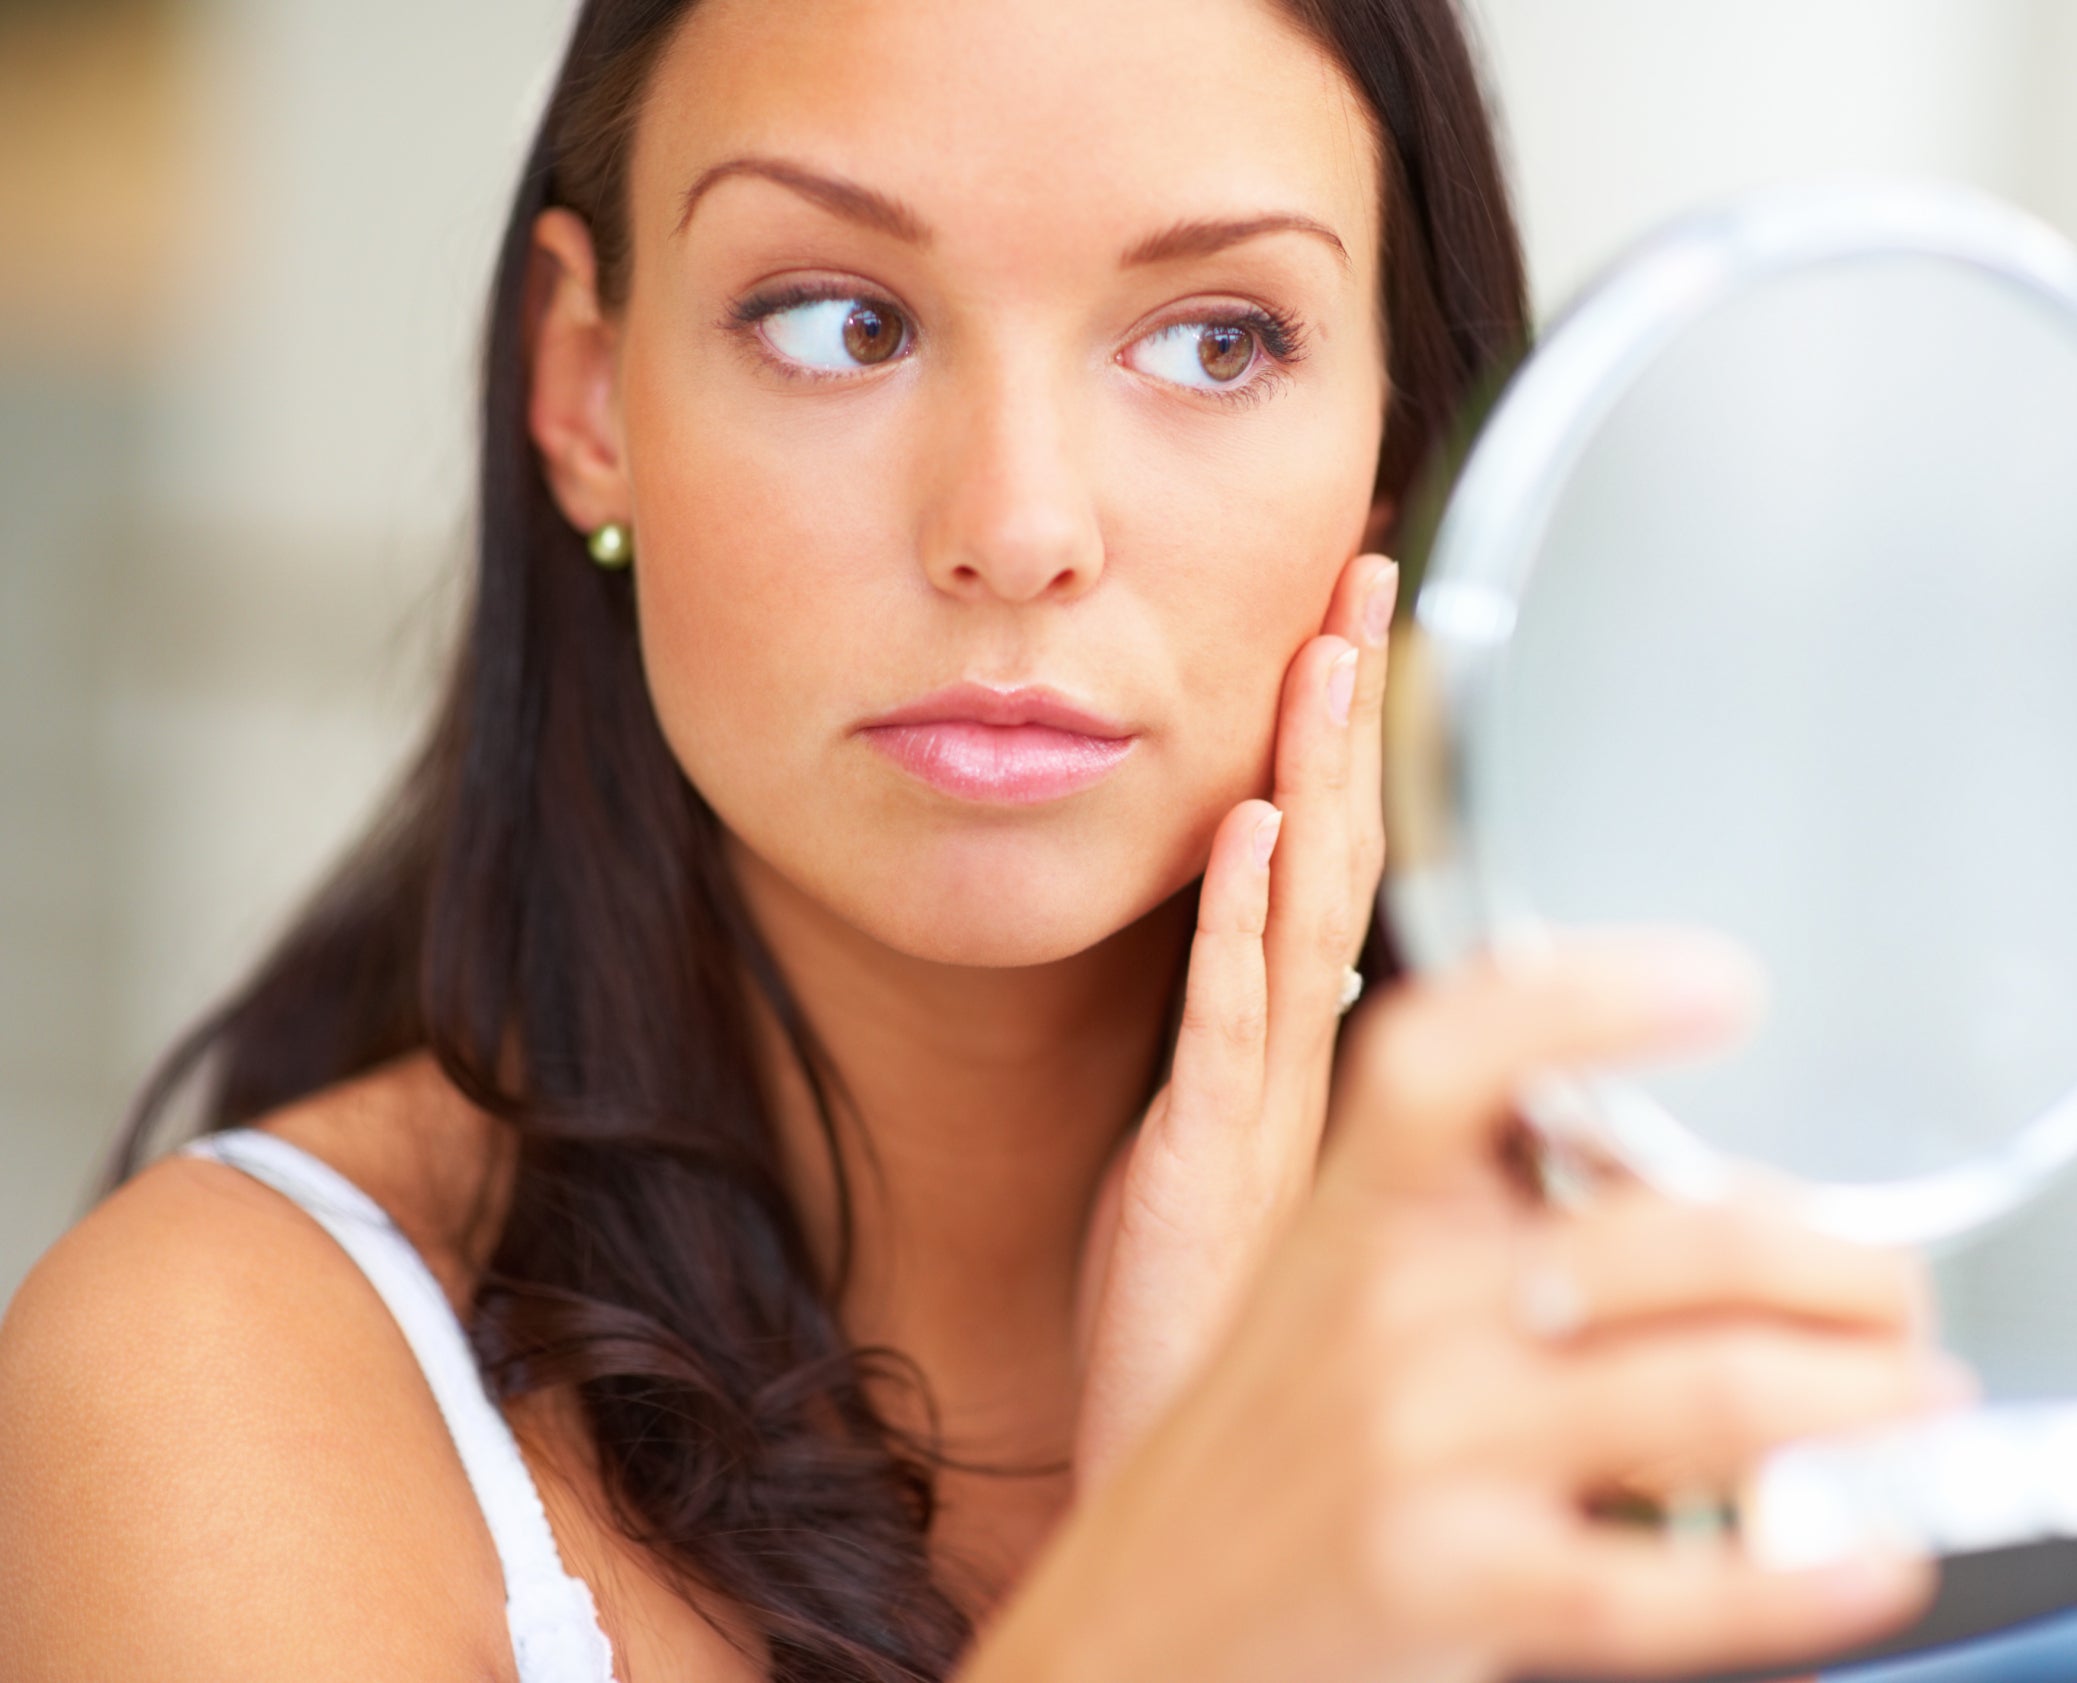 Woman looks at her skin in a mirror.